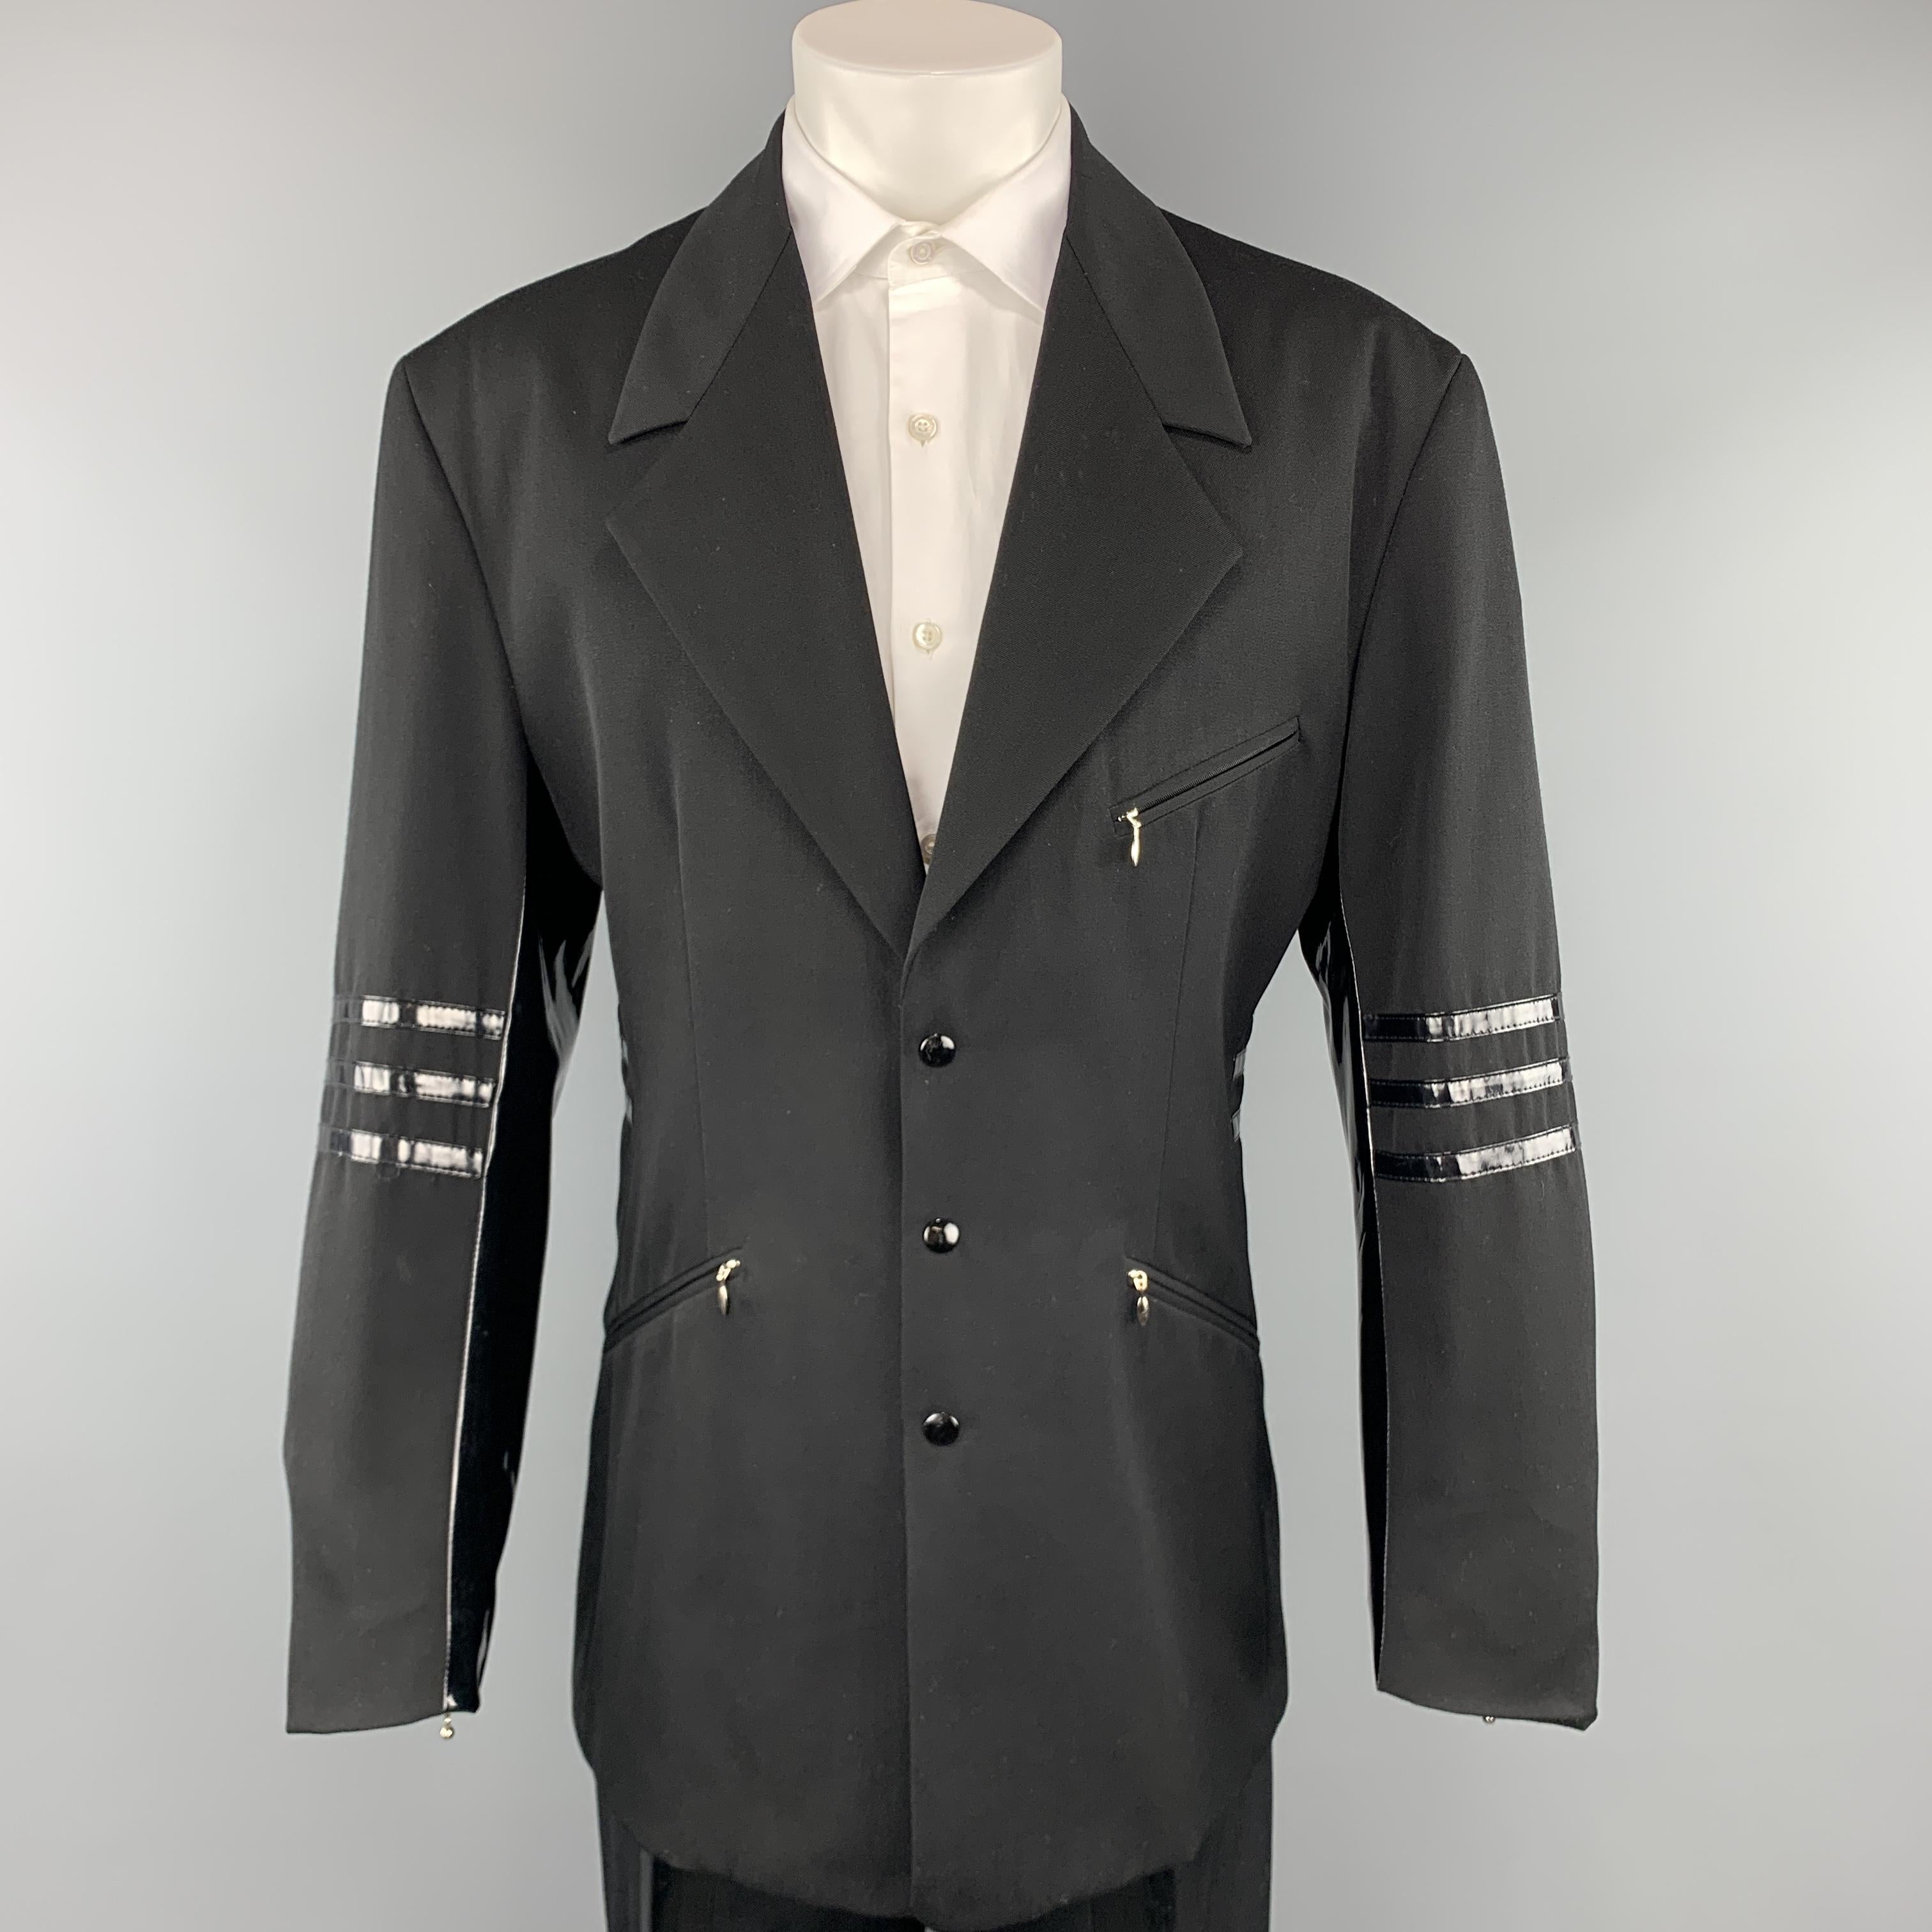 Vintage WILLIAM B suit comes in black wool twill and includes a single breasted, three snap closure sport coat with a downward peak lapel, slanted zip pockets, vinyl stripes and matching flat front vinyl stripe panel flat front trousers. 

Very Good